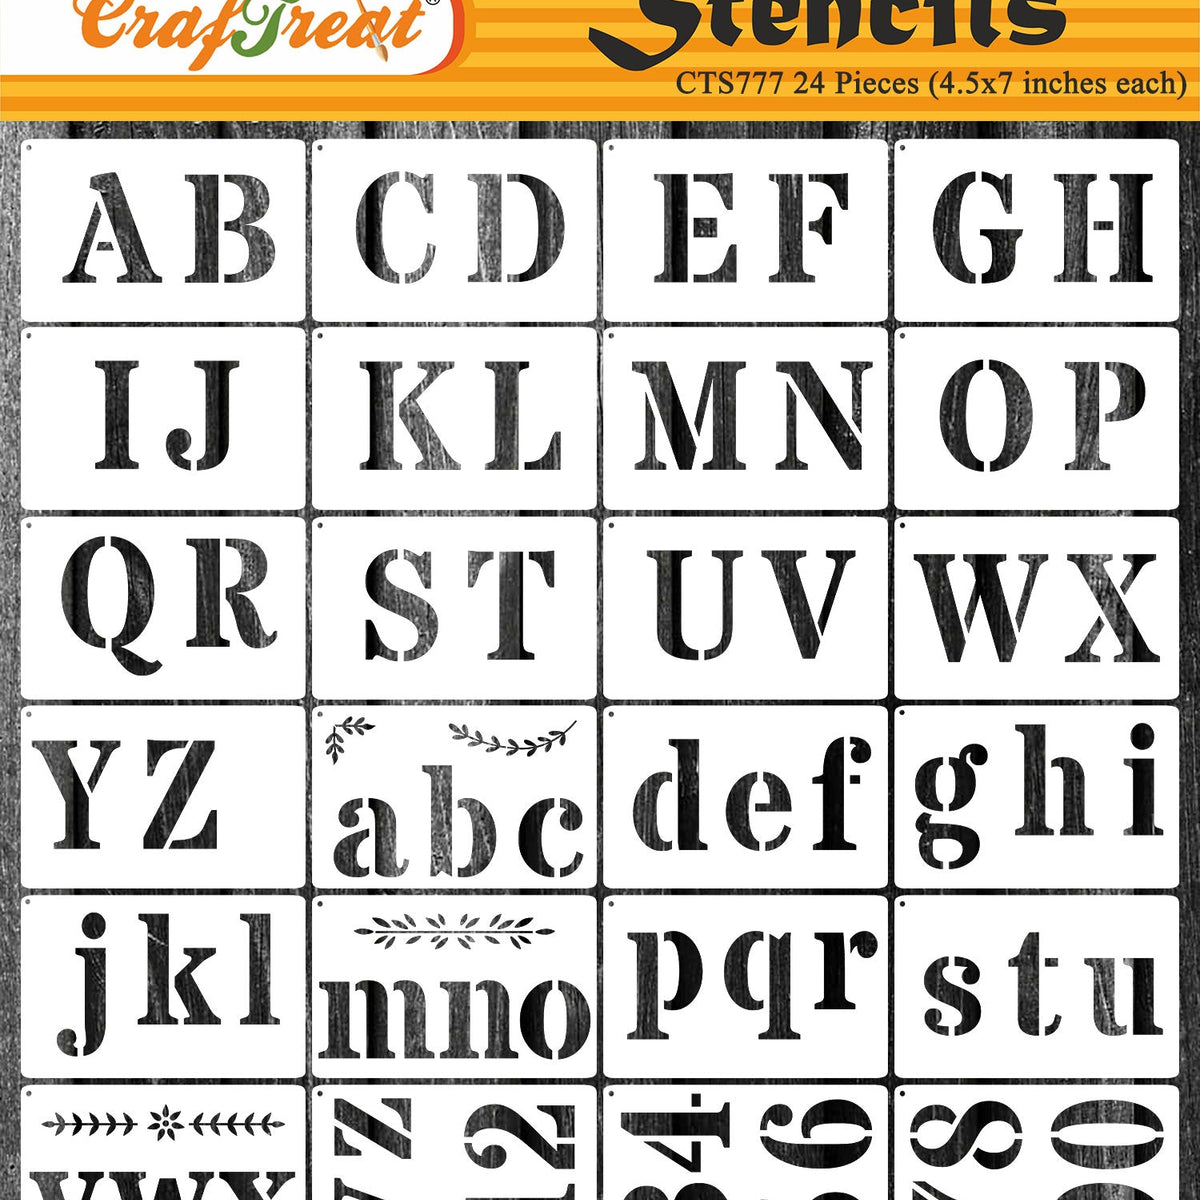 Briartw 3 inch and 5 inch Height Letter Stencils Symbol Numbers Craft  Stencils 84 Pieces Full Set Interlocking Stencil Kit,Reusable Alphabet  Templates for Painting 